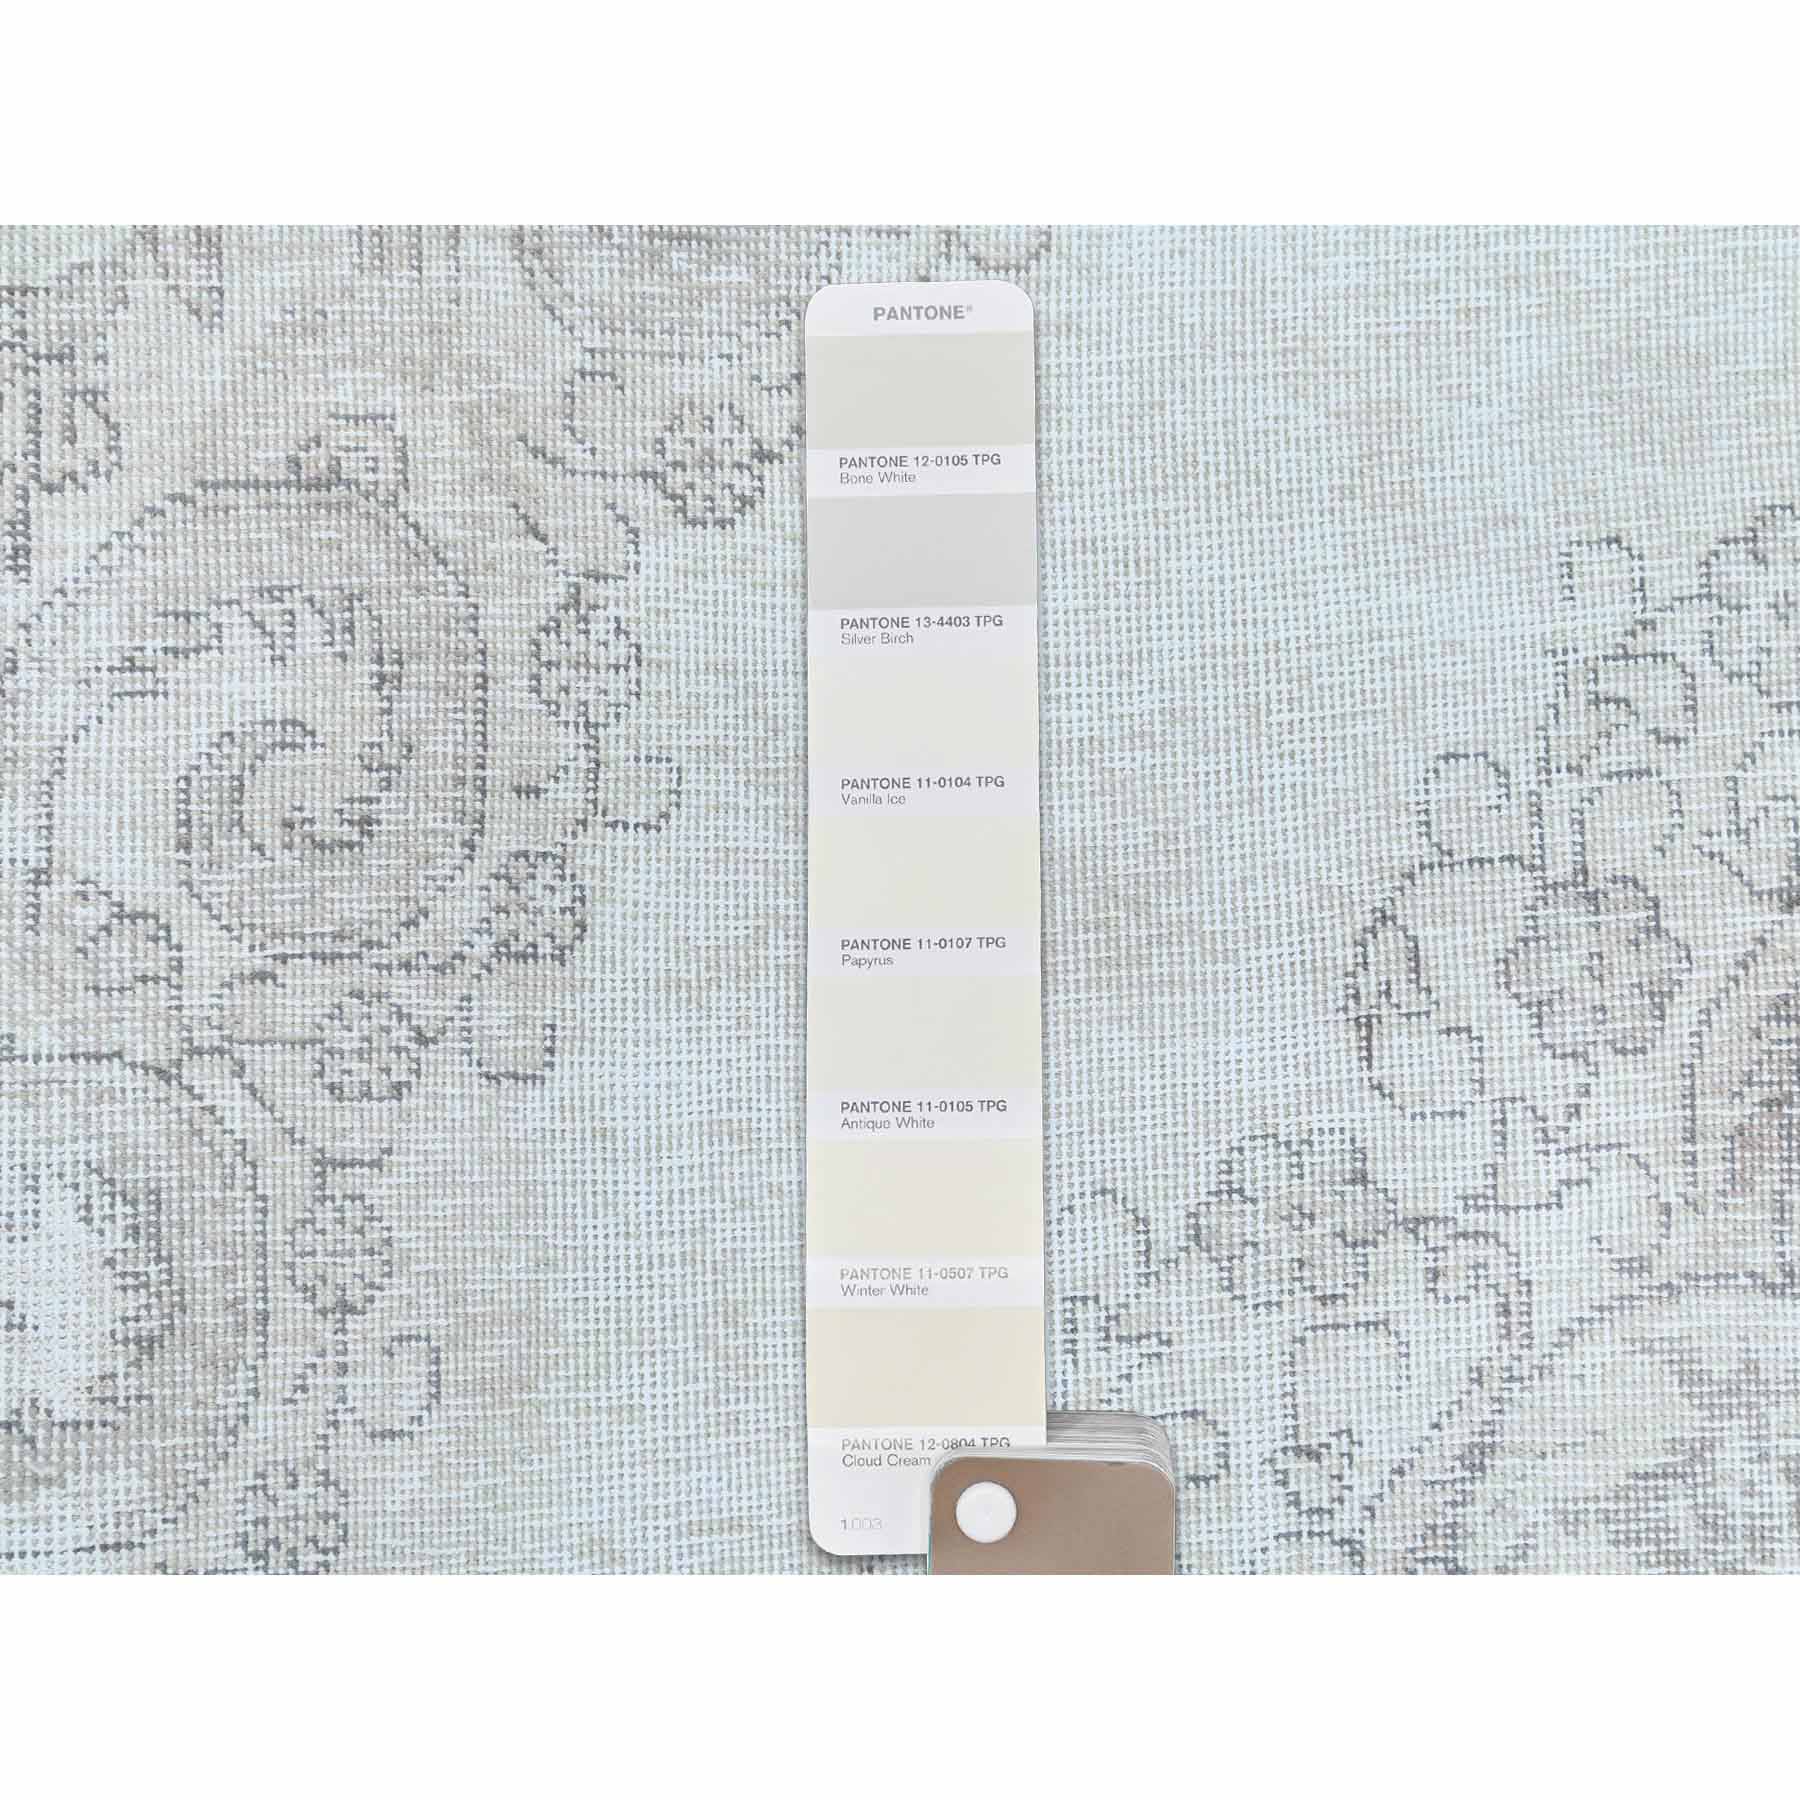 Overdyed-Vintage-Hand-Knotted-Rug-408445